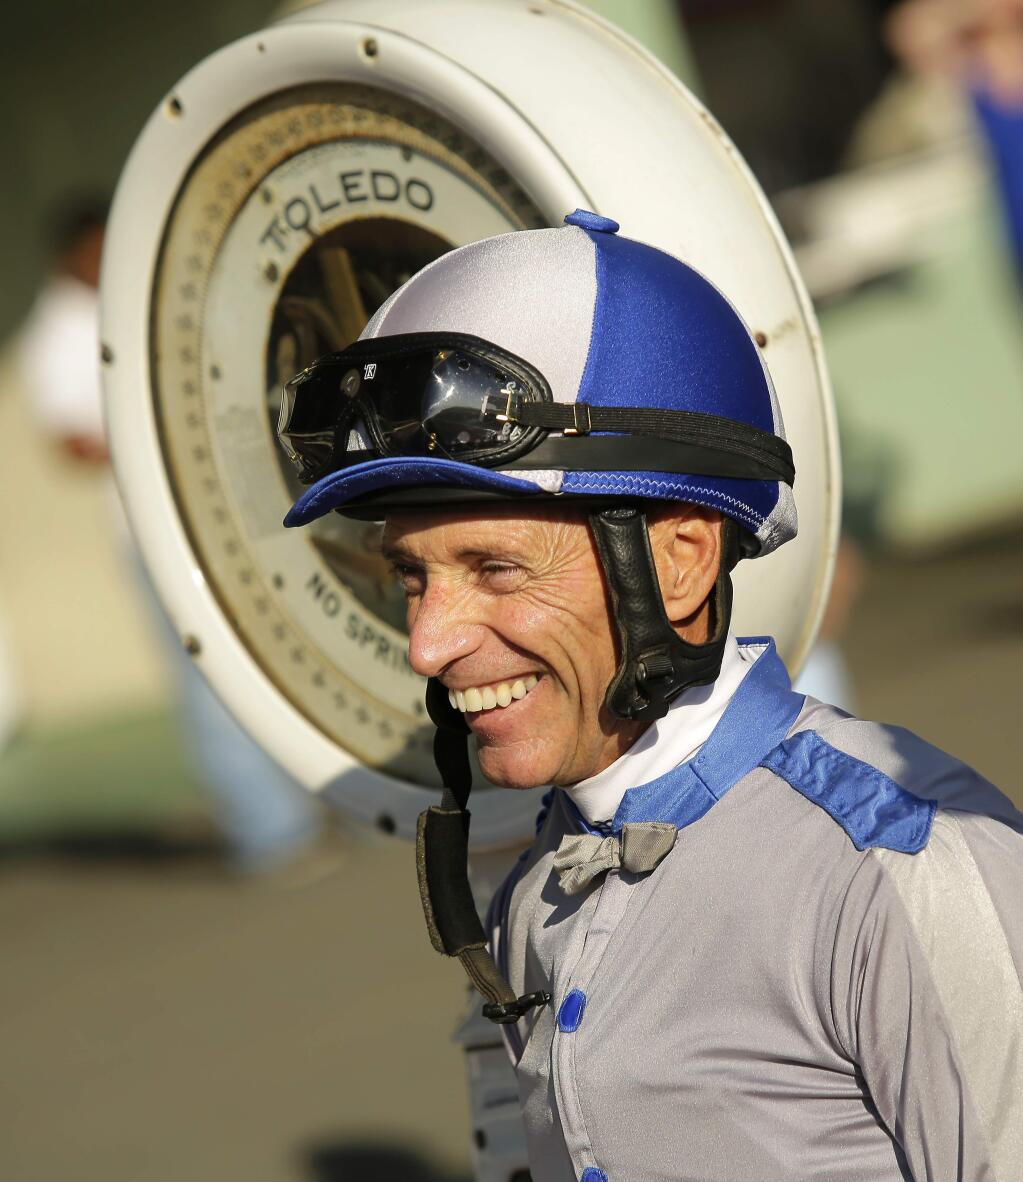 Jockey Russell Baze smiles on the scale after winning the Wine Country Debutante Stakes horse race at the Sonoma County Fair in 2014. (CONNER JAY/ PD)